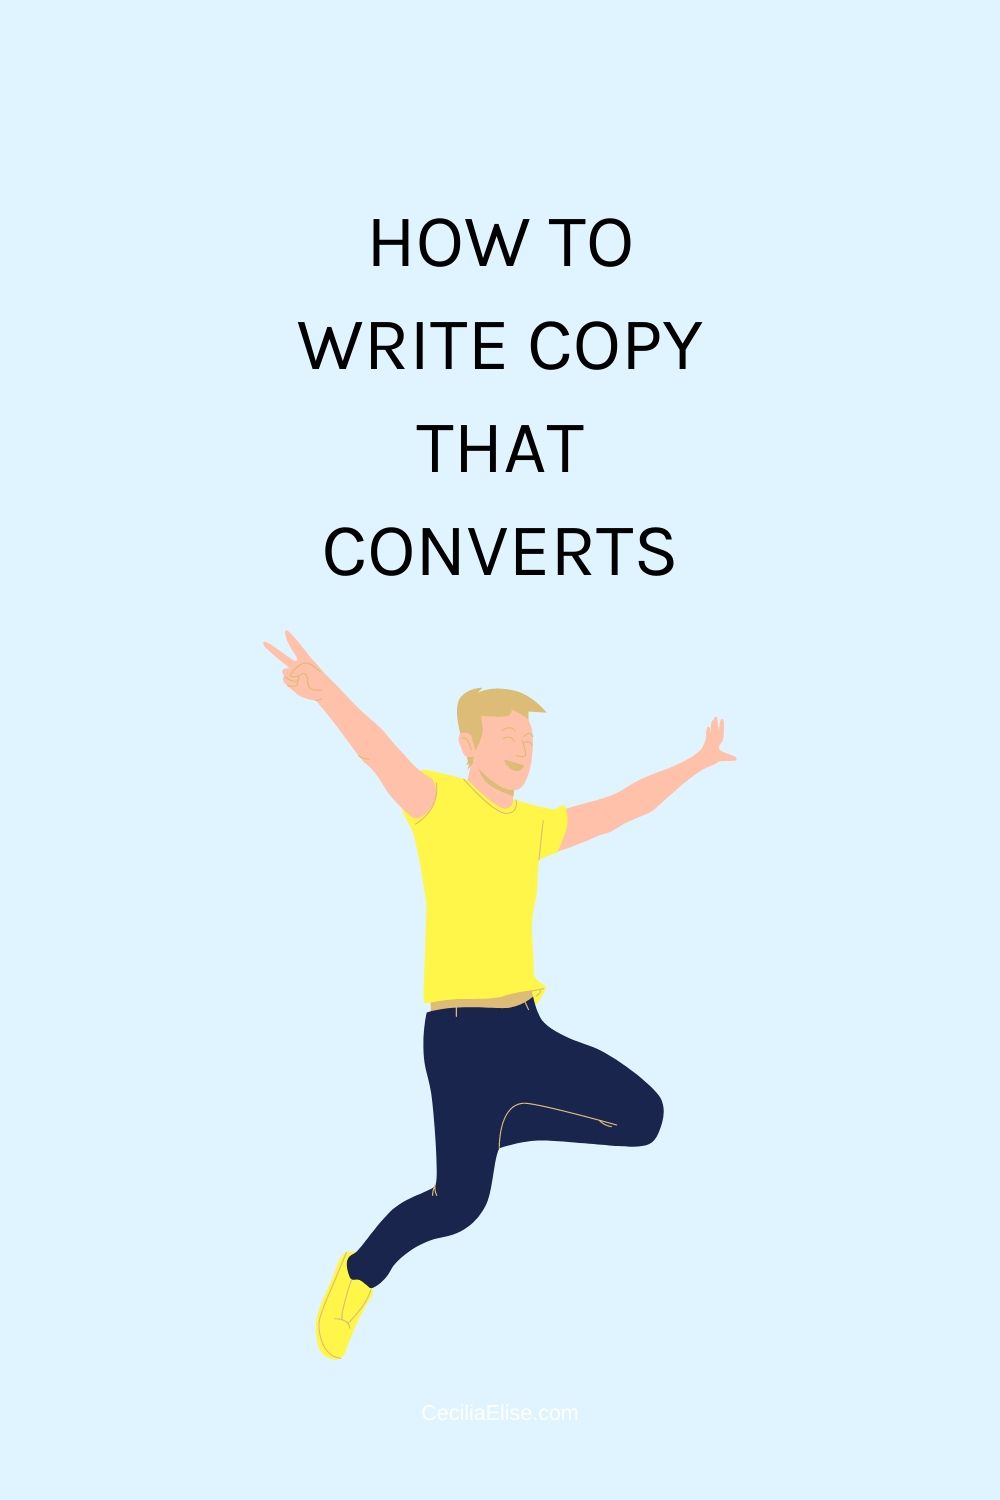 How to write copy that converts